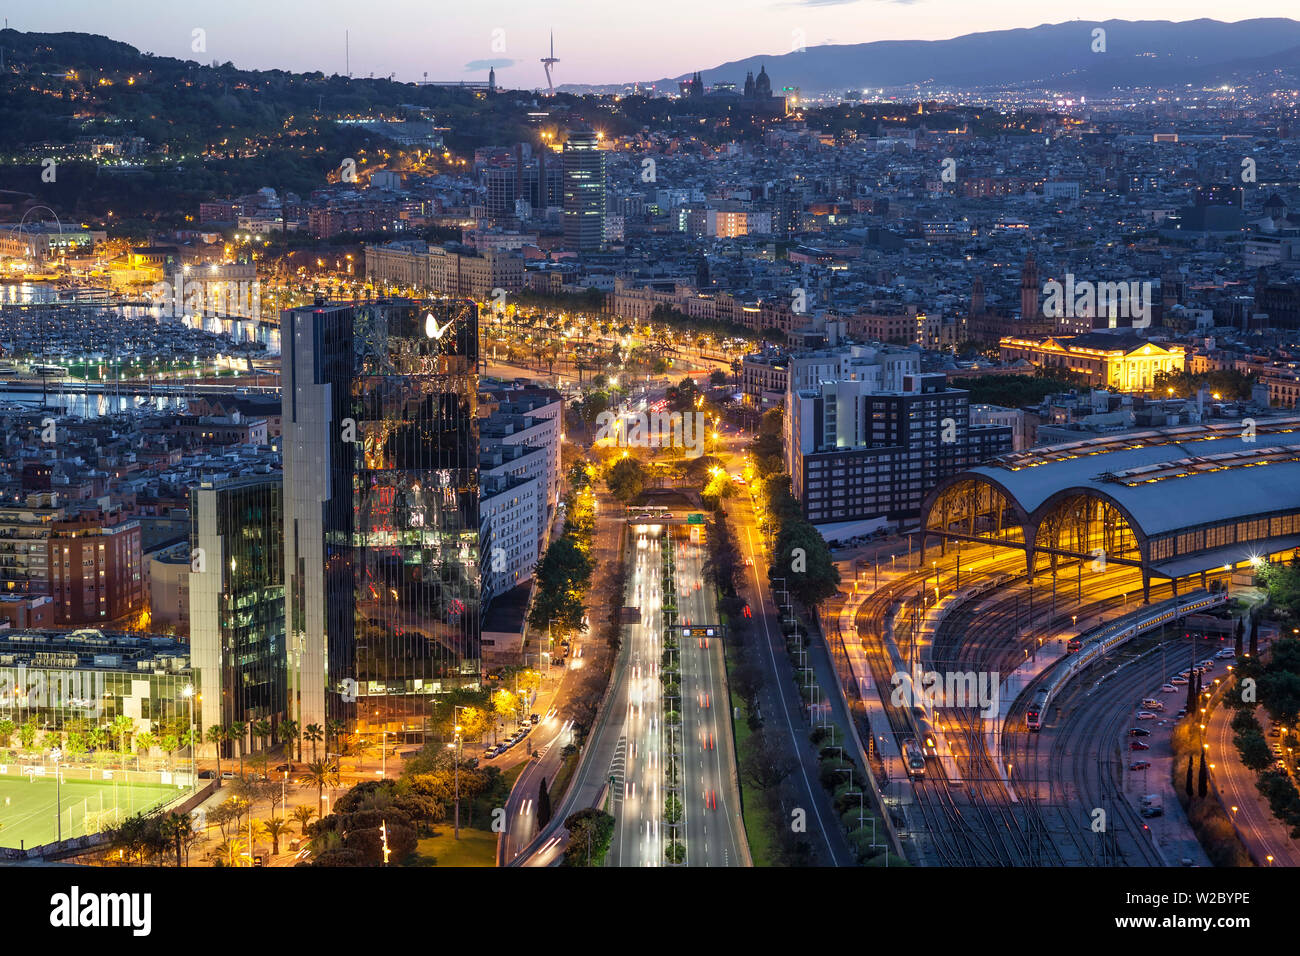 Elevated dusk view over Barcelona city centre, Catalunya, Spain Stock Photo